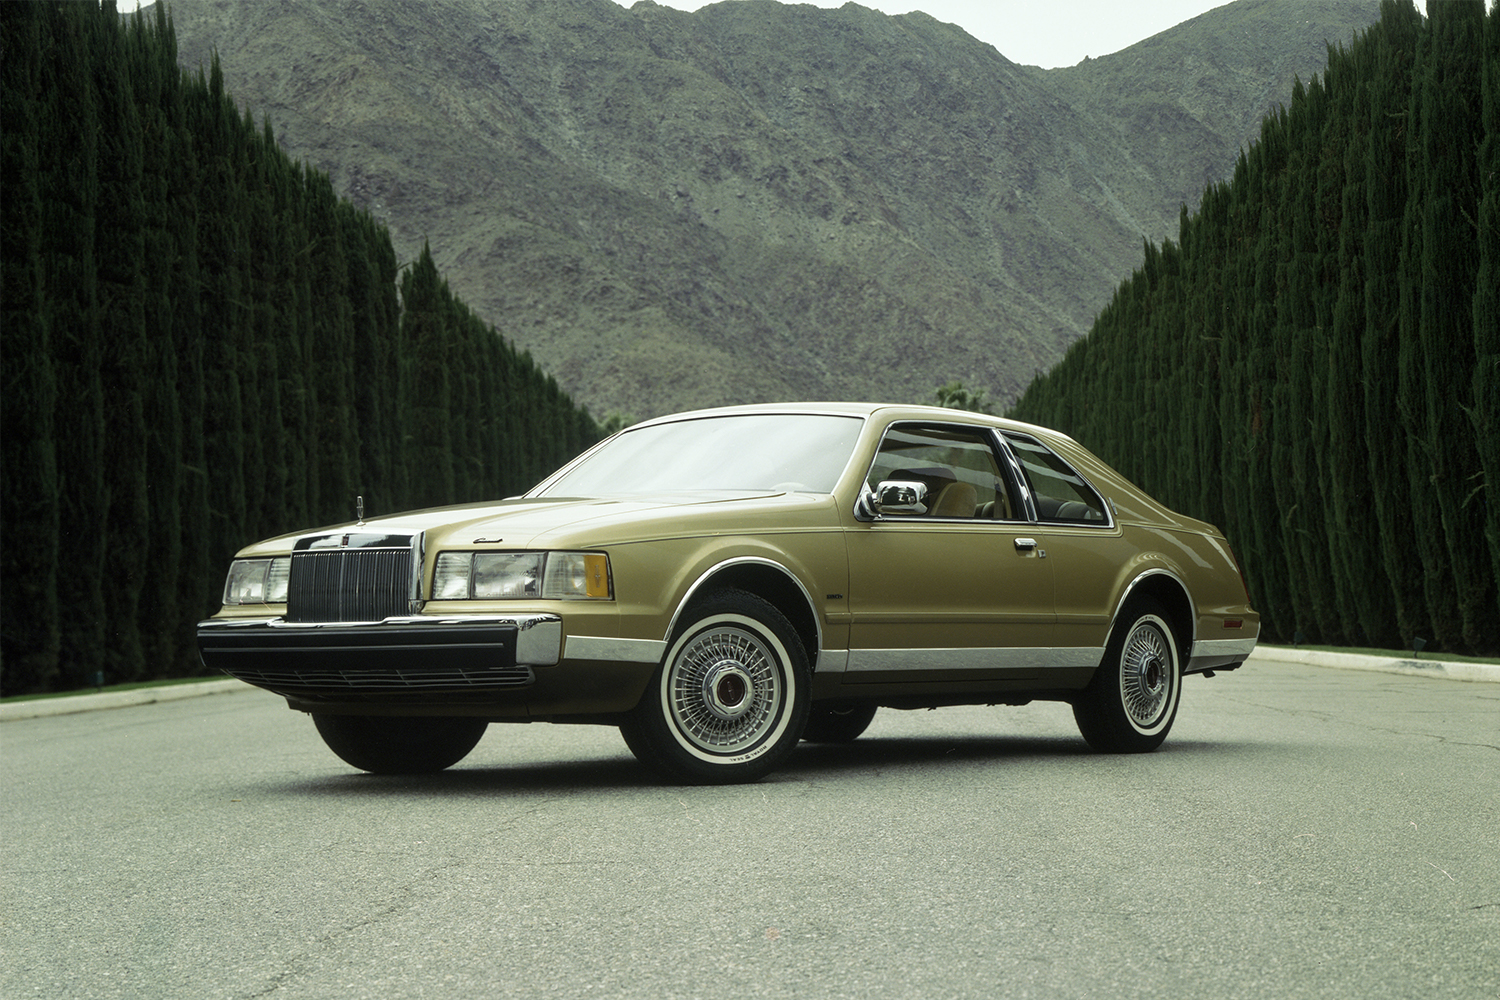 A 1984 Lincoln Continental Mark VII, before the introduction of the V8